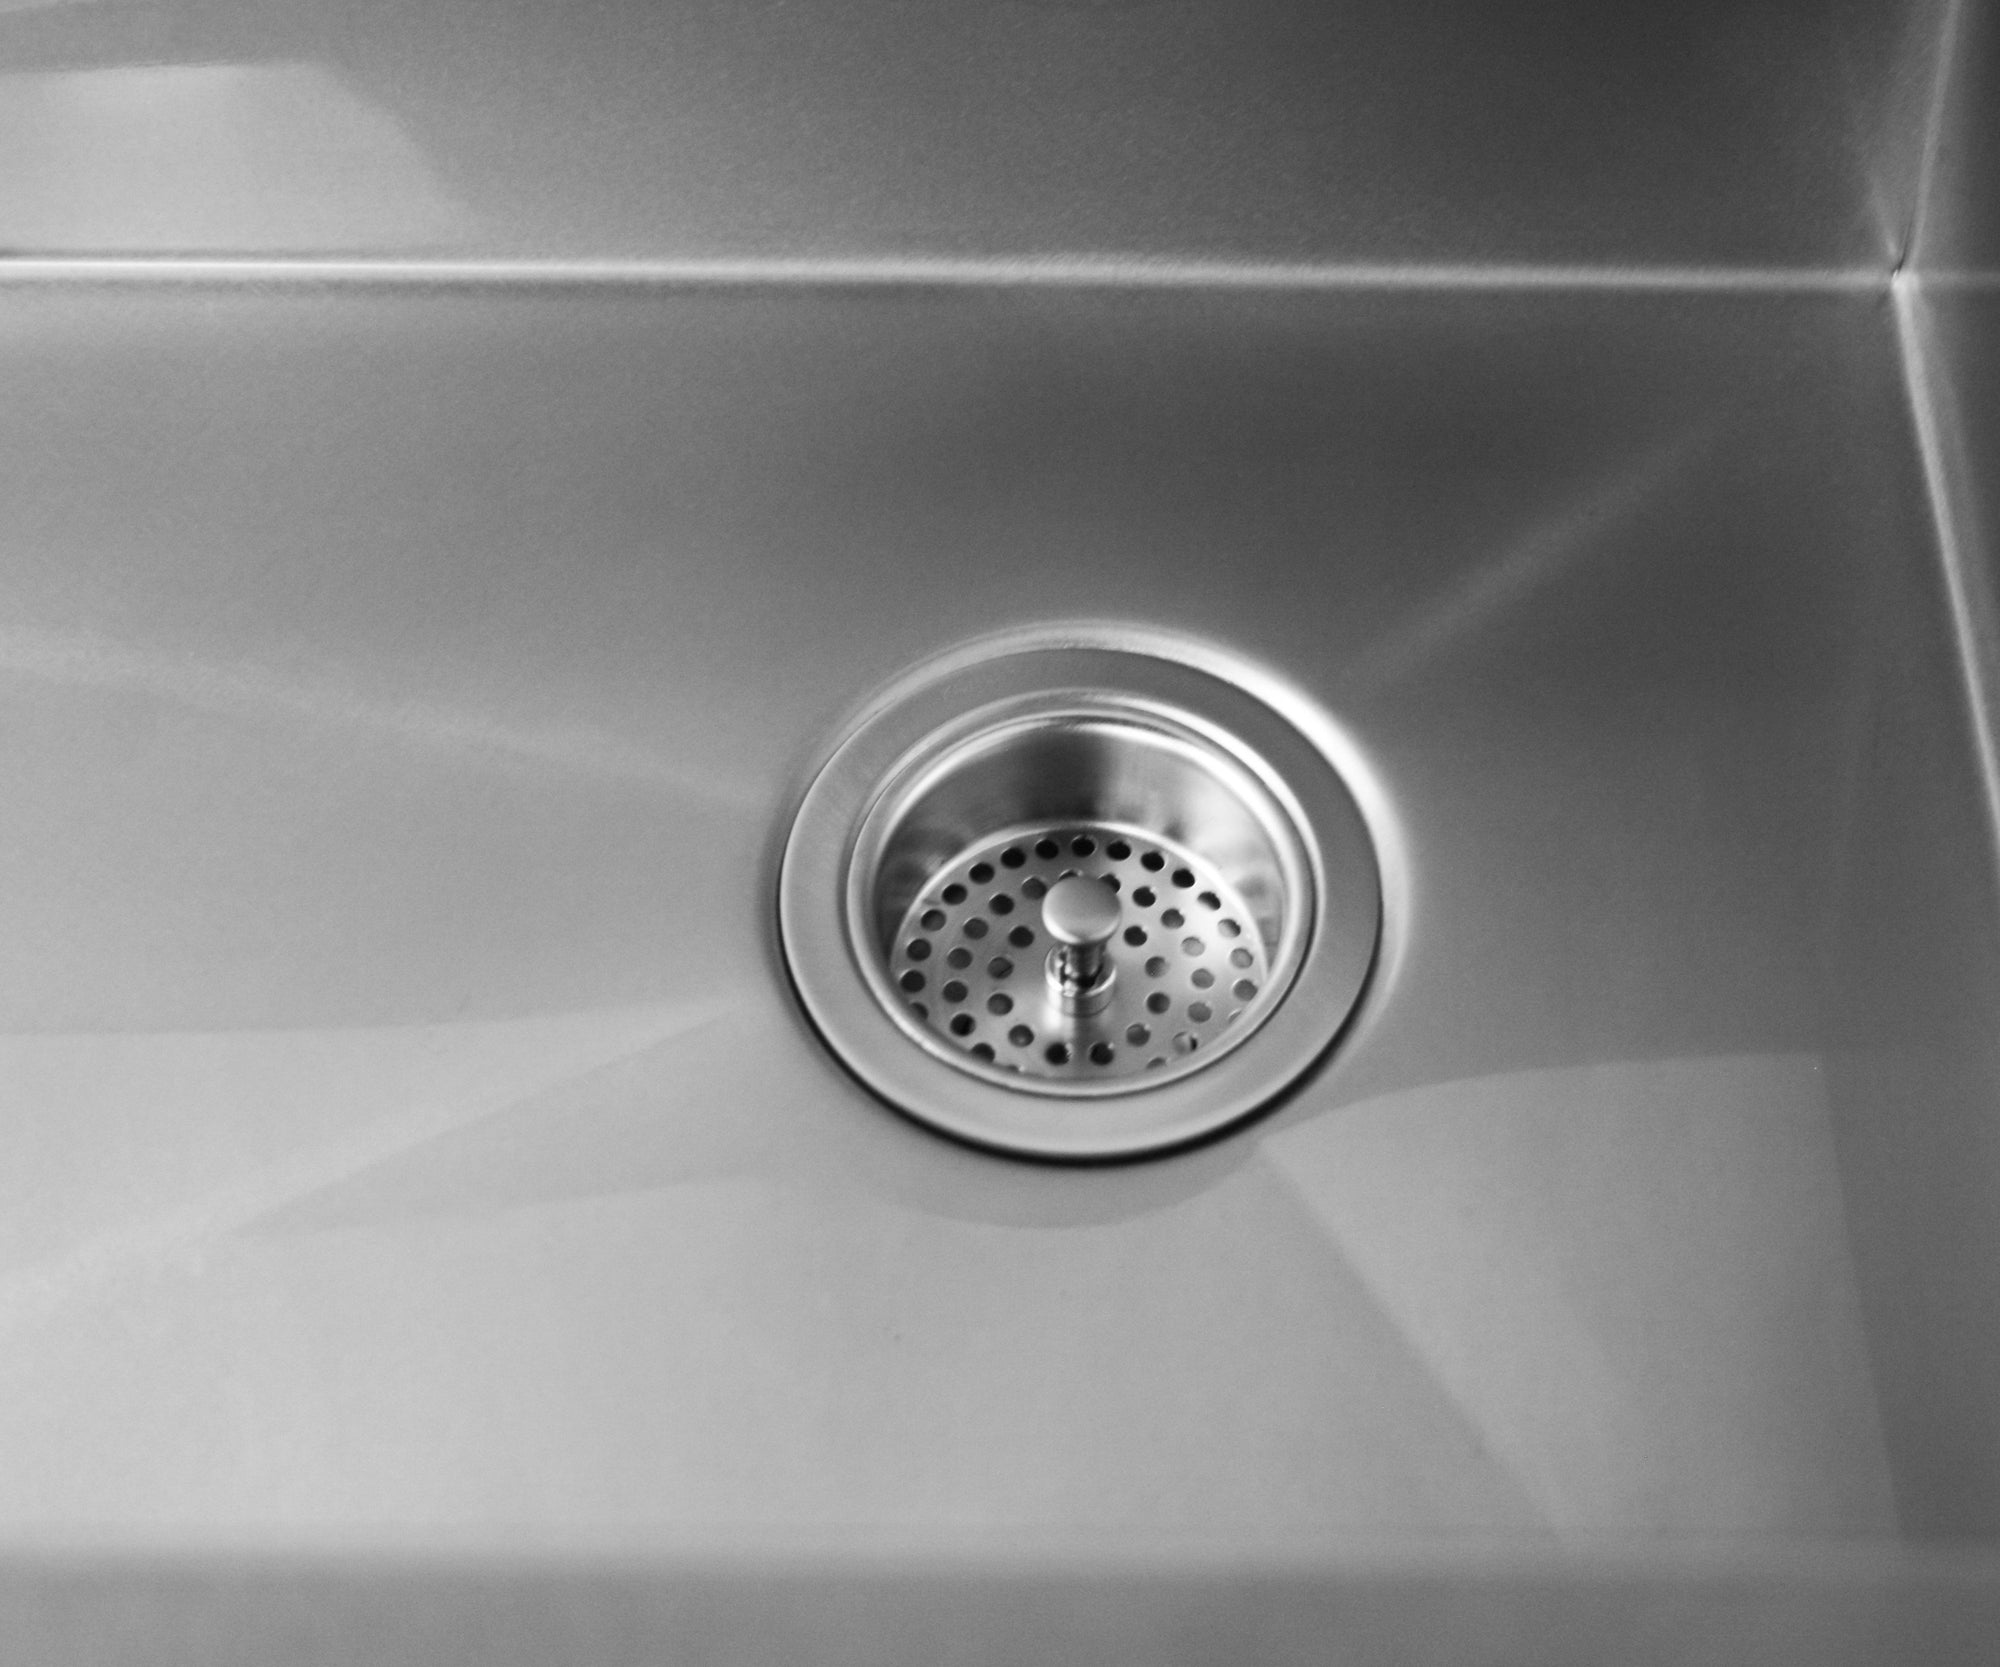 Luxe stainless steel finish on the Heritage farmhouse sink by Havens.